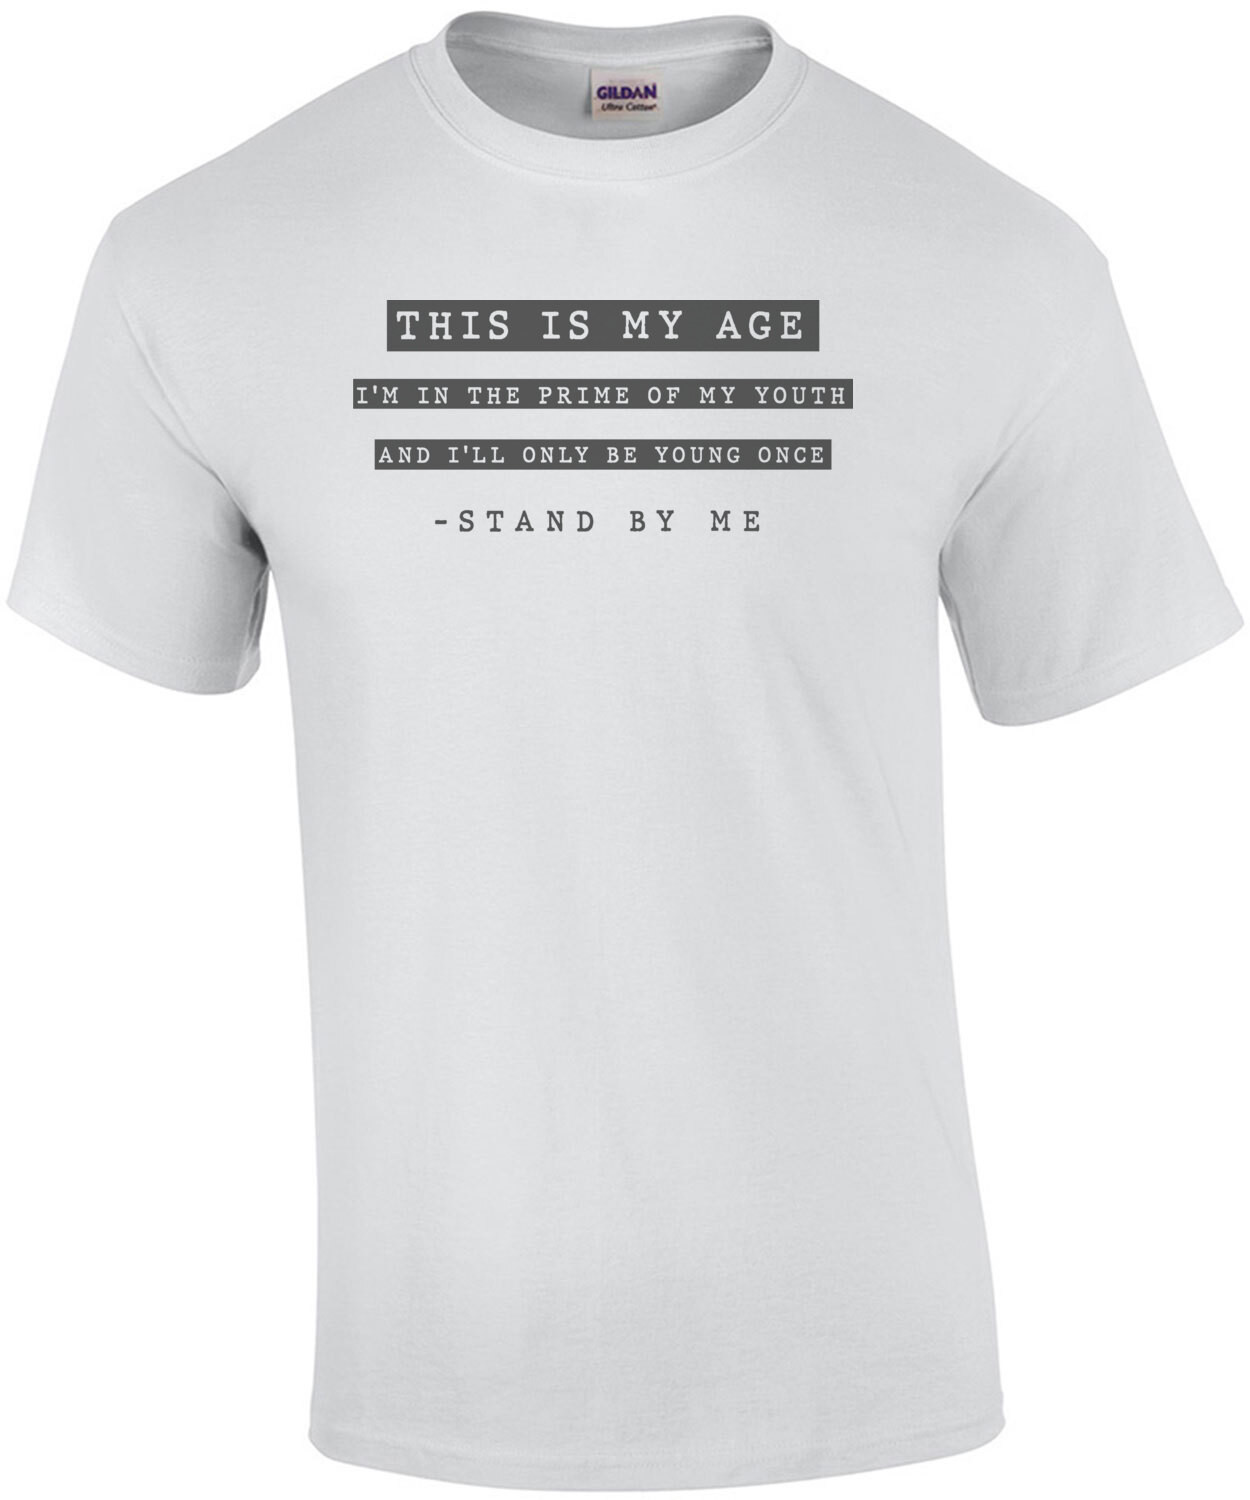 This is my age I'm in the prime of my youth and I'll only be young once - stand by me - 80's t-shirt